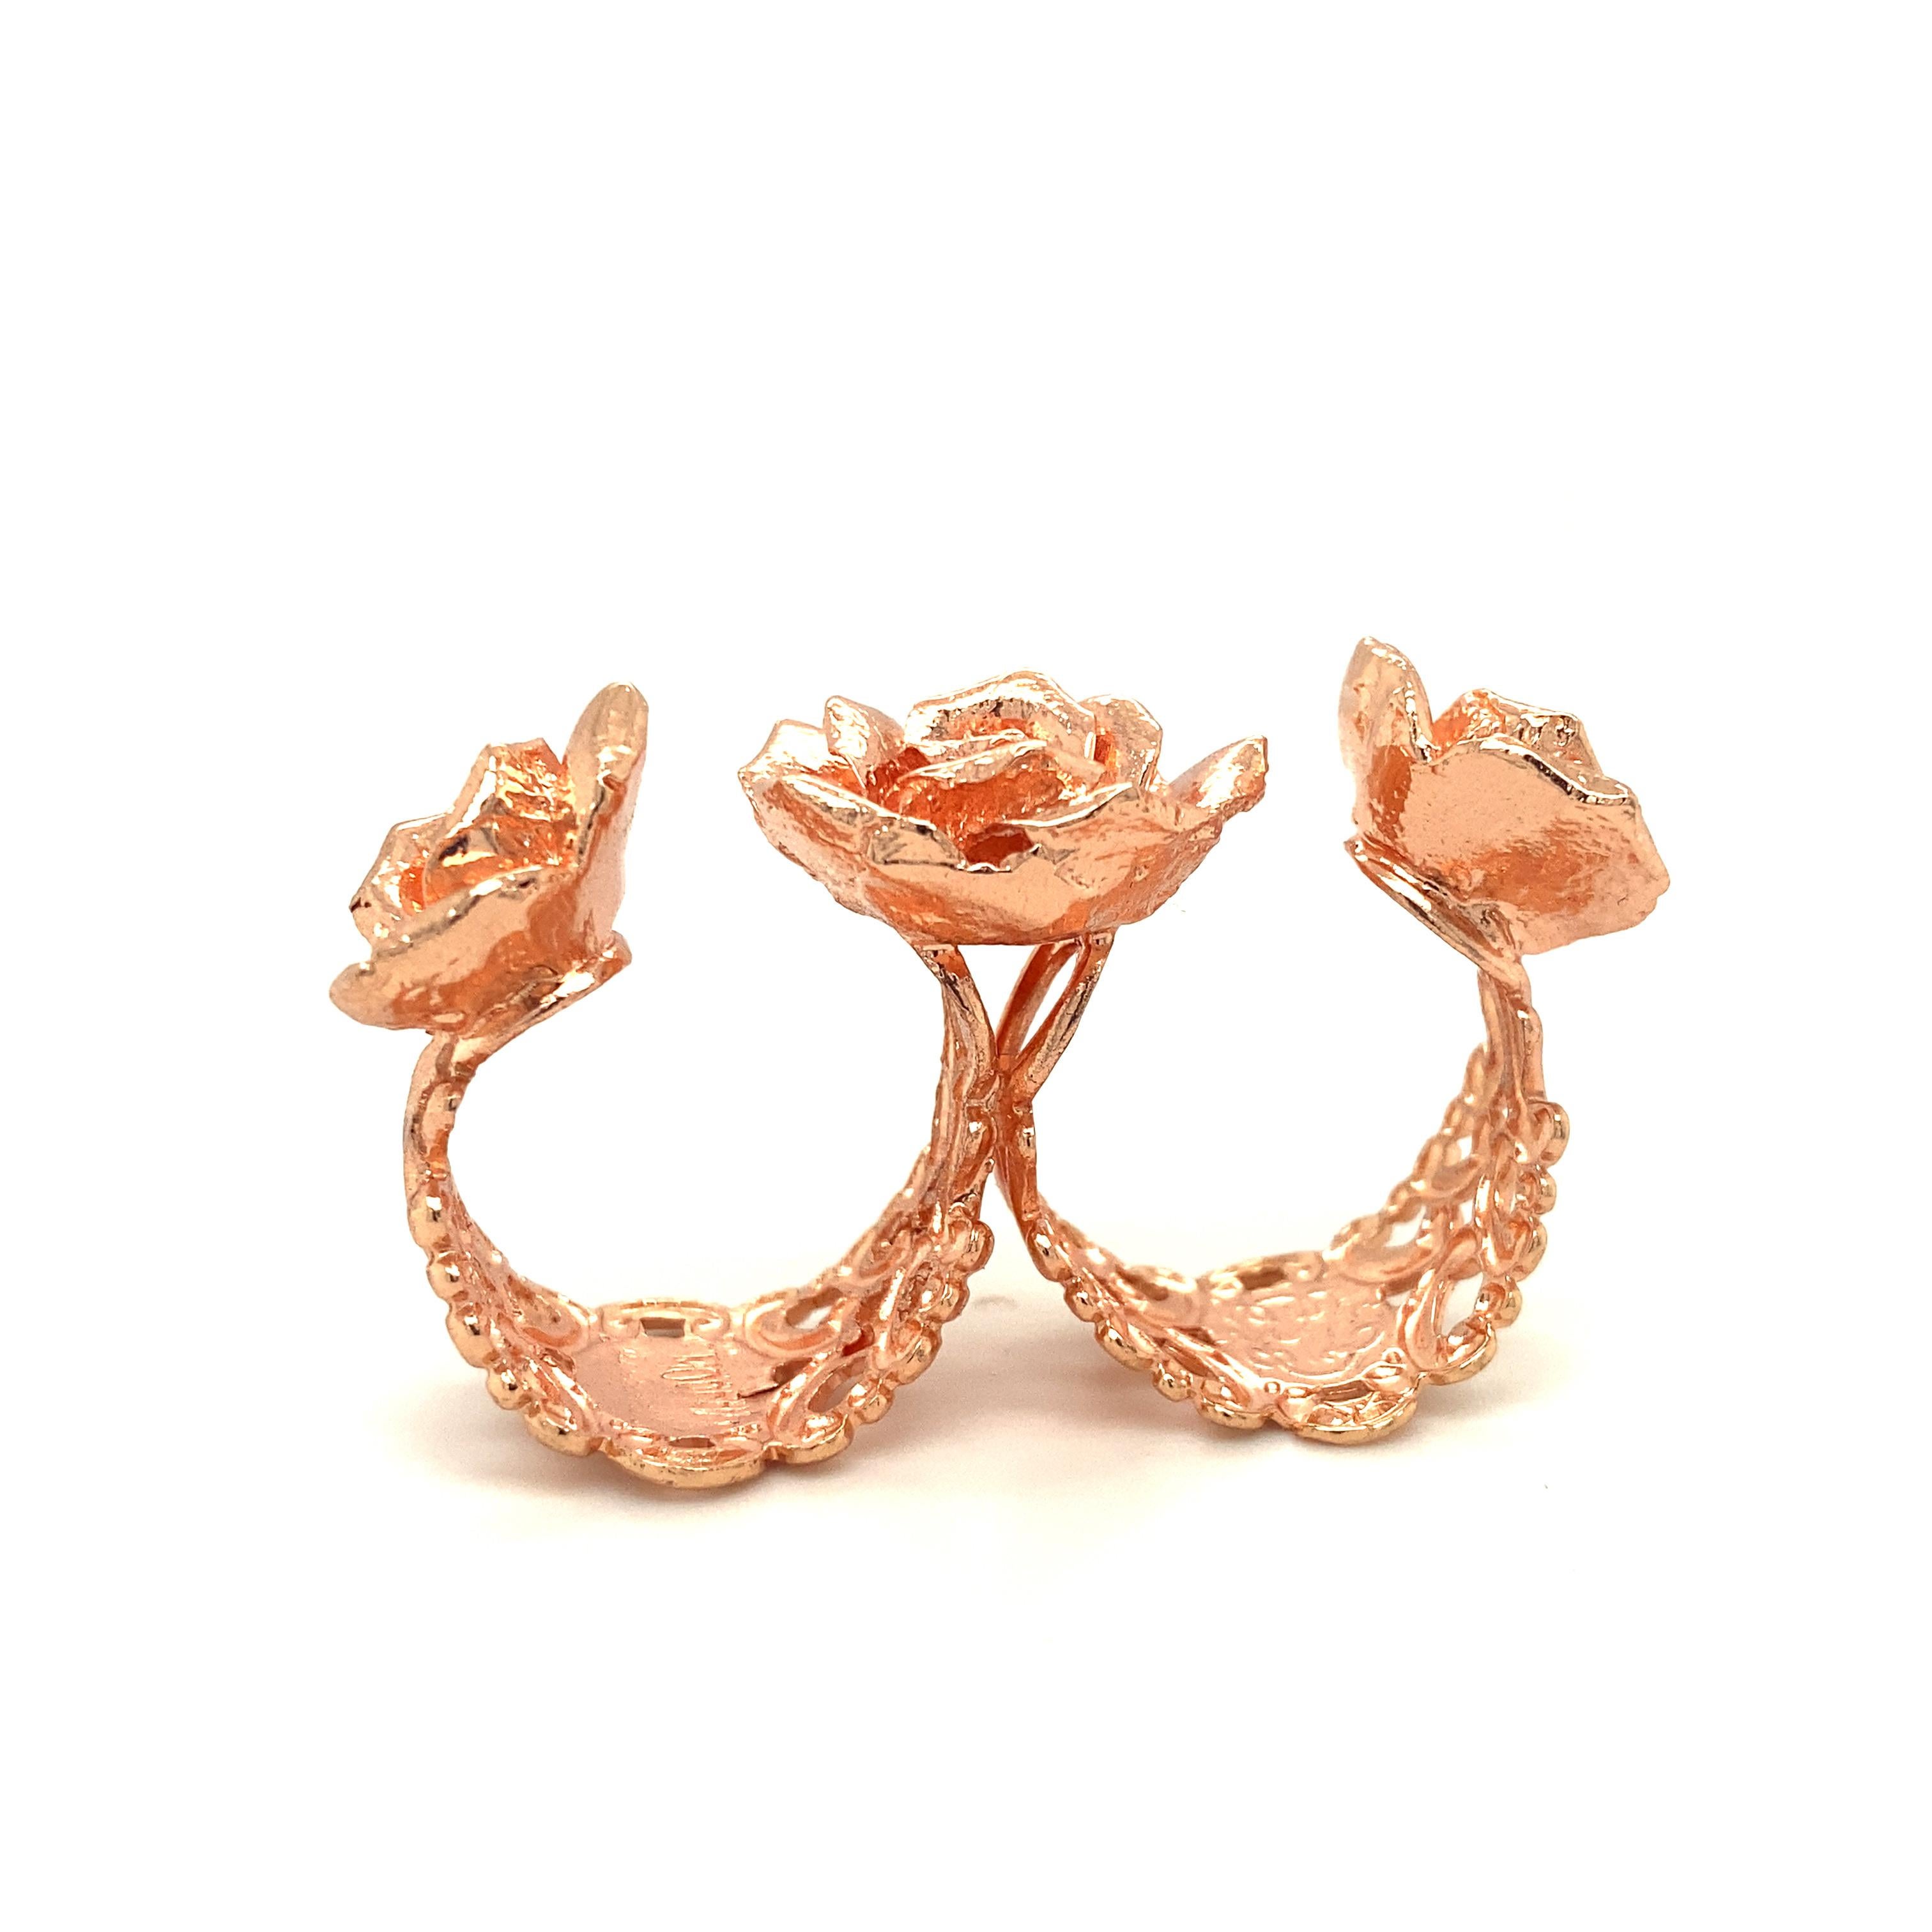 Triple Rosey Rosette Ring In New Condition For Sale In Miami Beach, FL